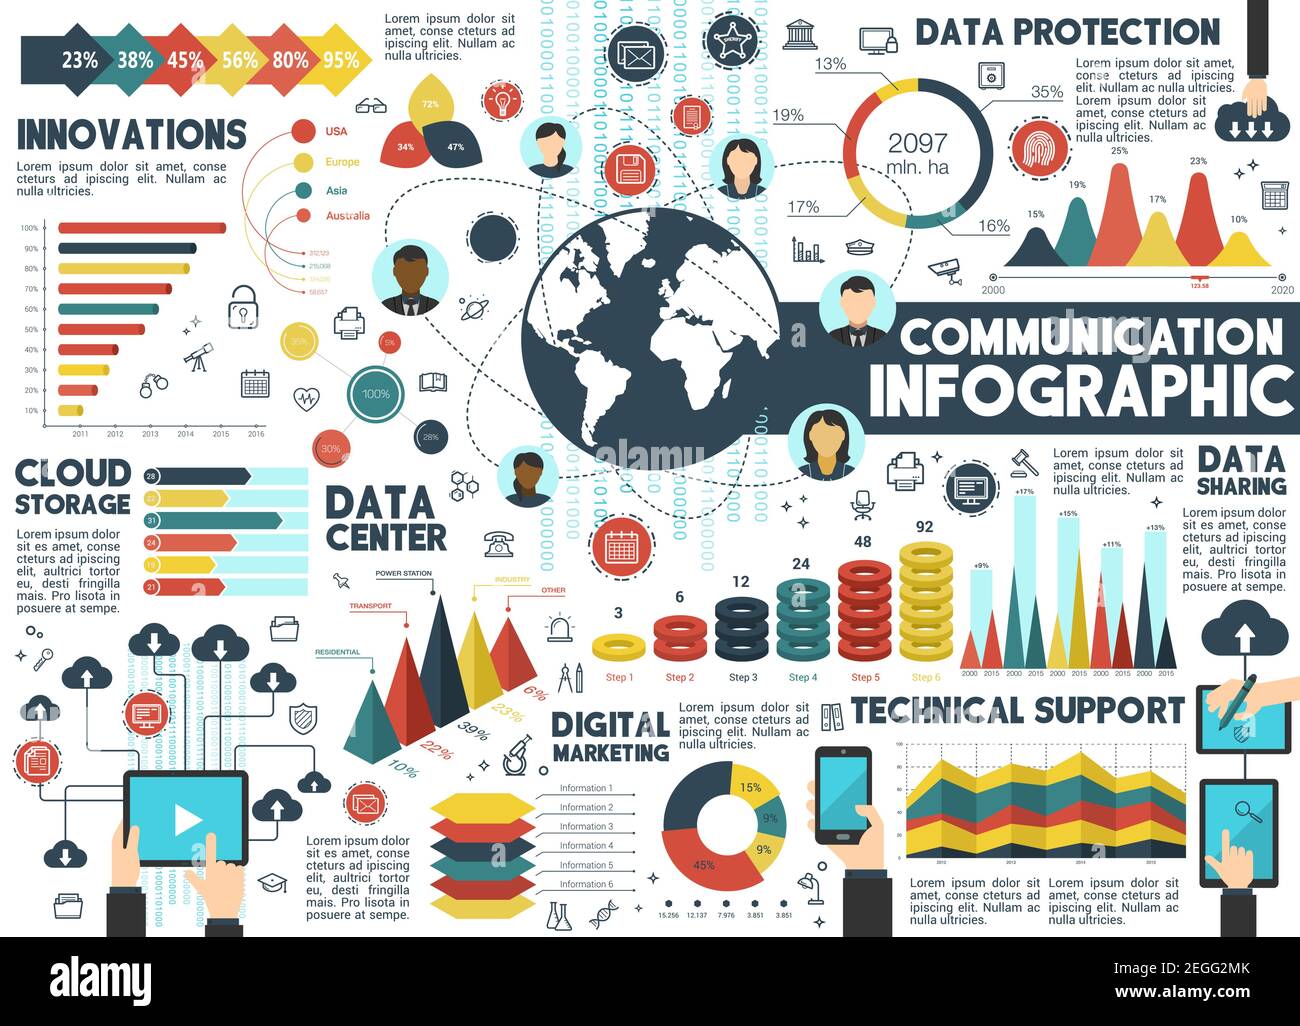 Information and communication technology infographic. Cloud storage, information sharing and data protection statistic chart, technical support and da Stock Vector